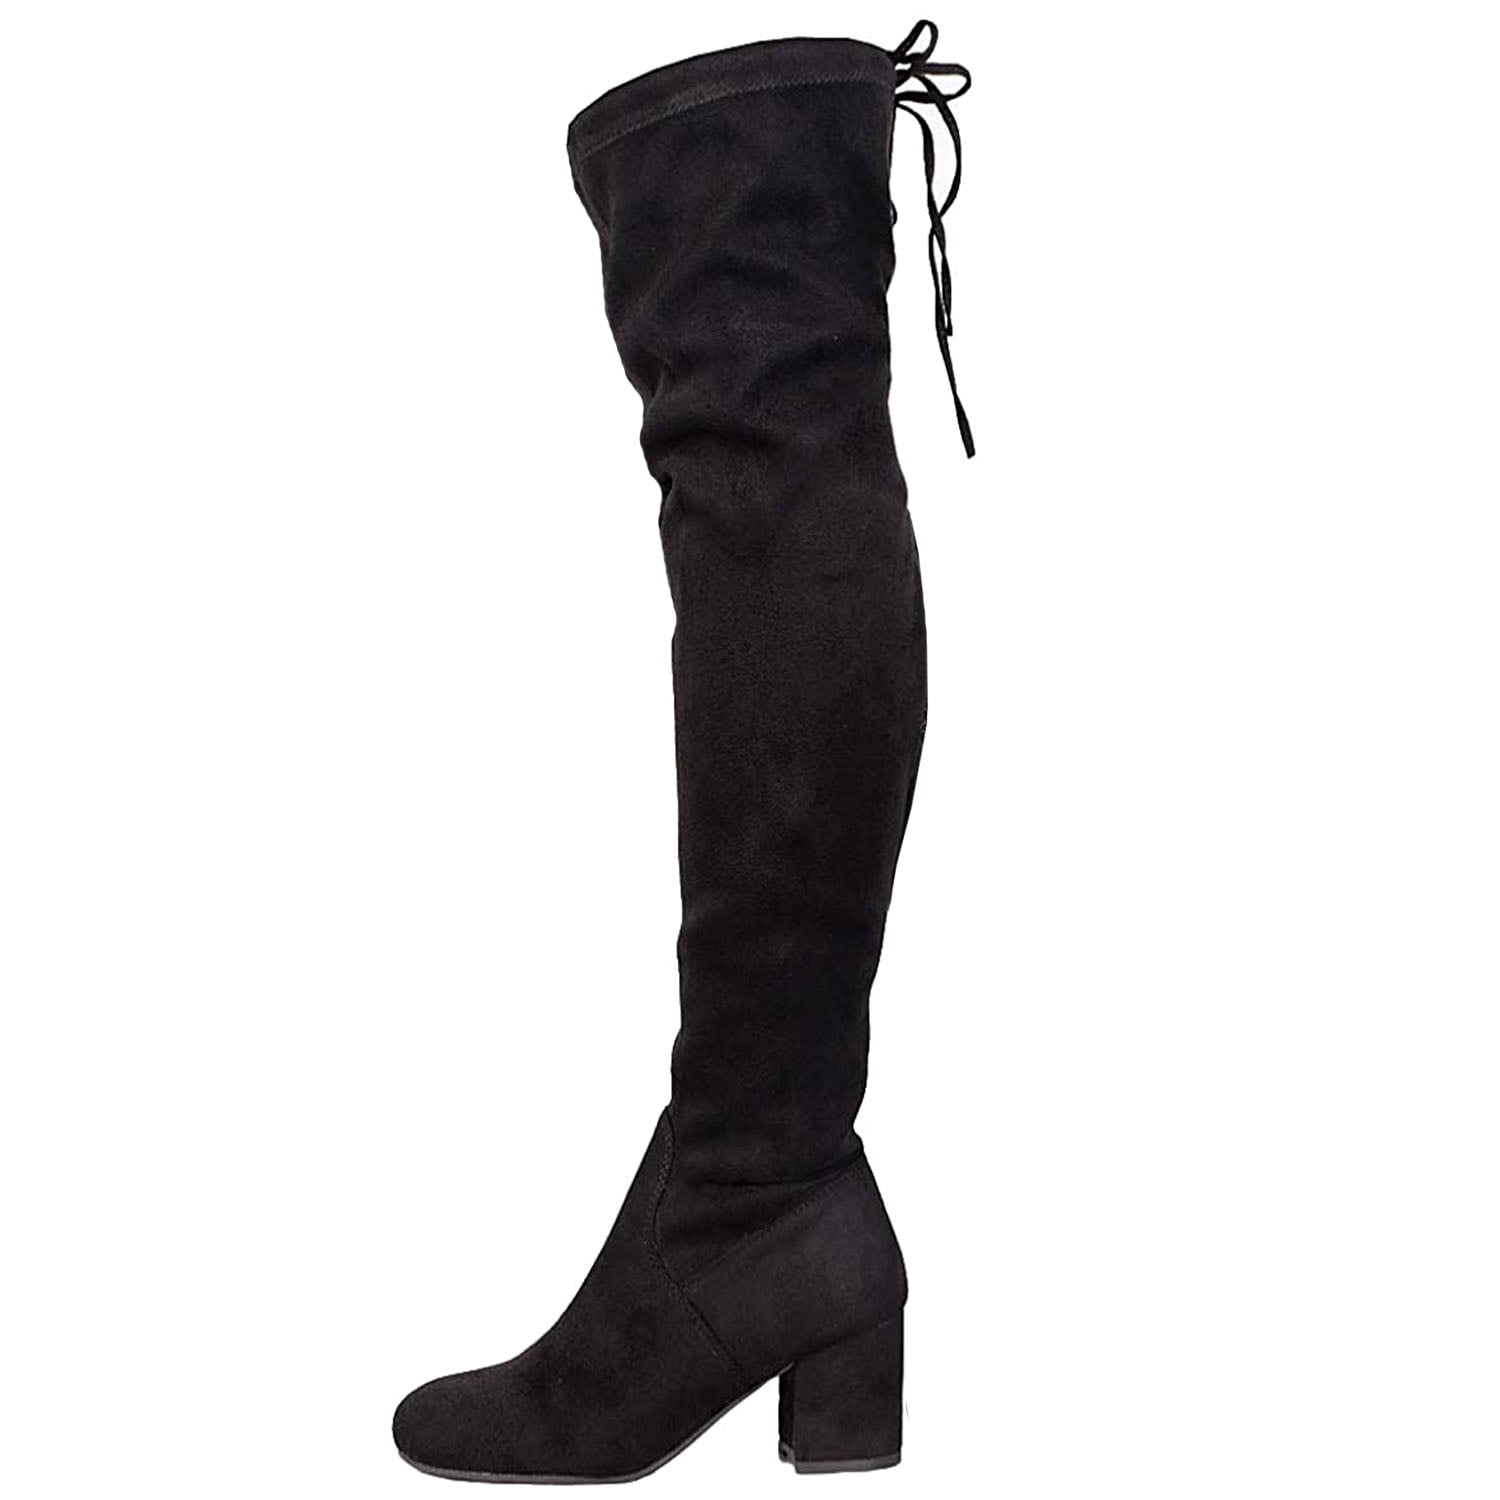 Women Mid Block Heel Thigh High Boots Over The Knee Party Stretch Lace Up Shoes 